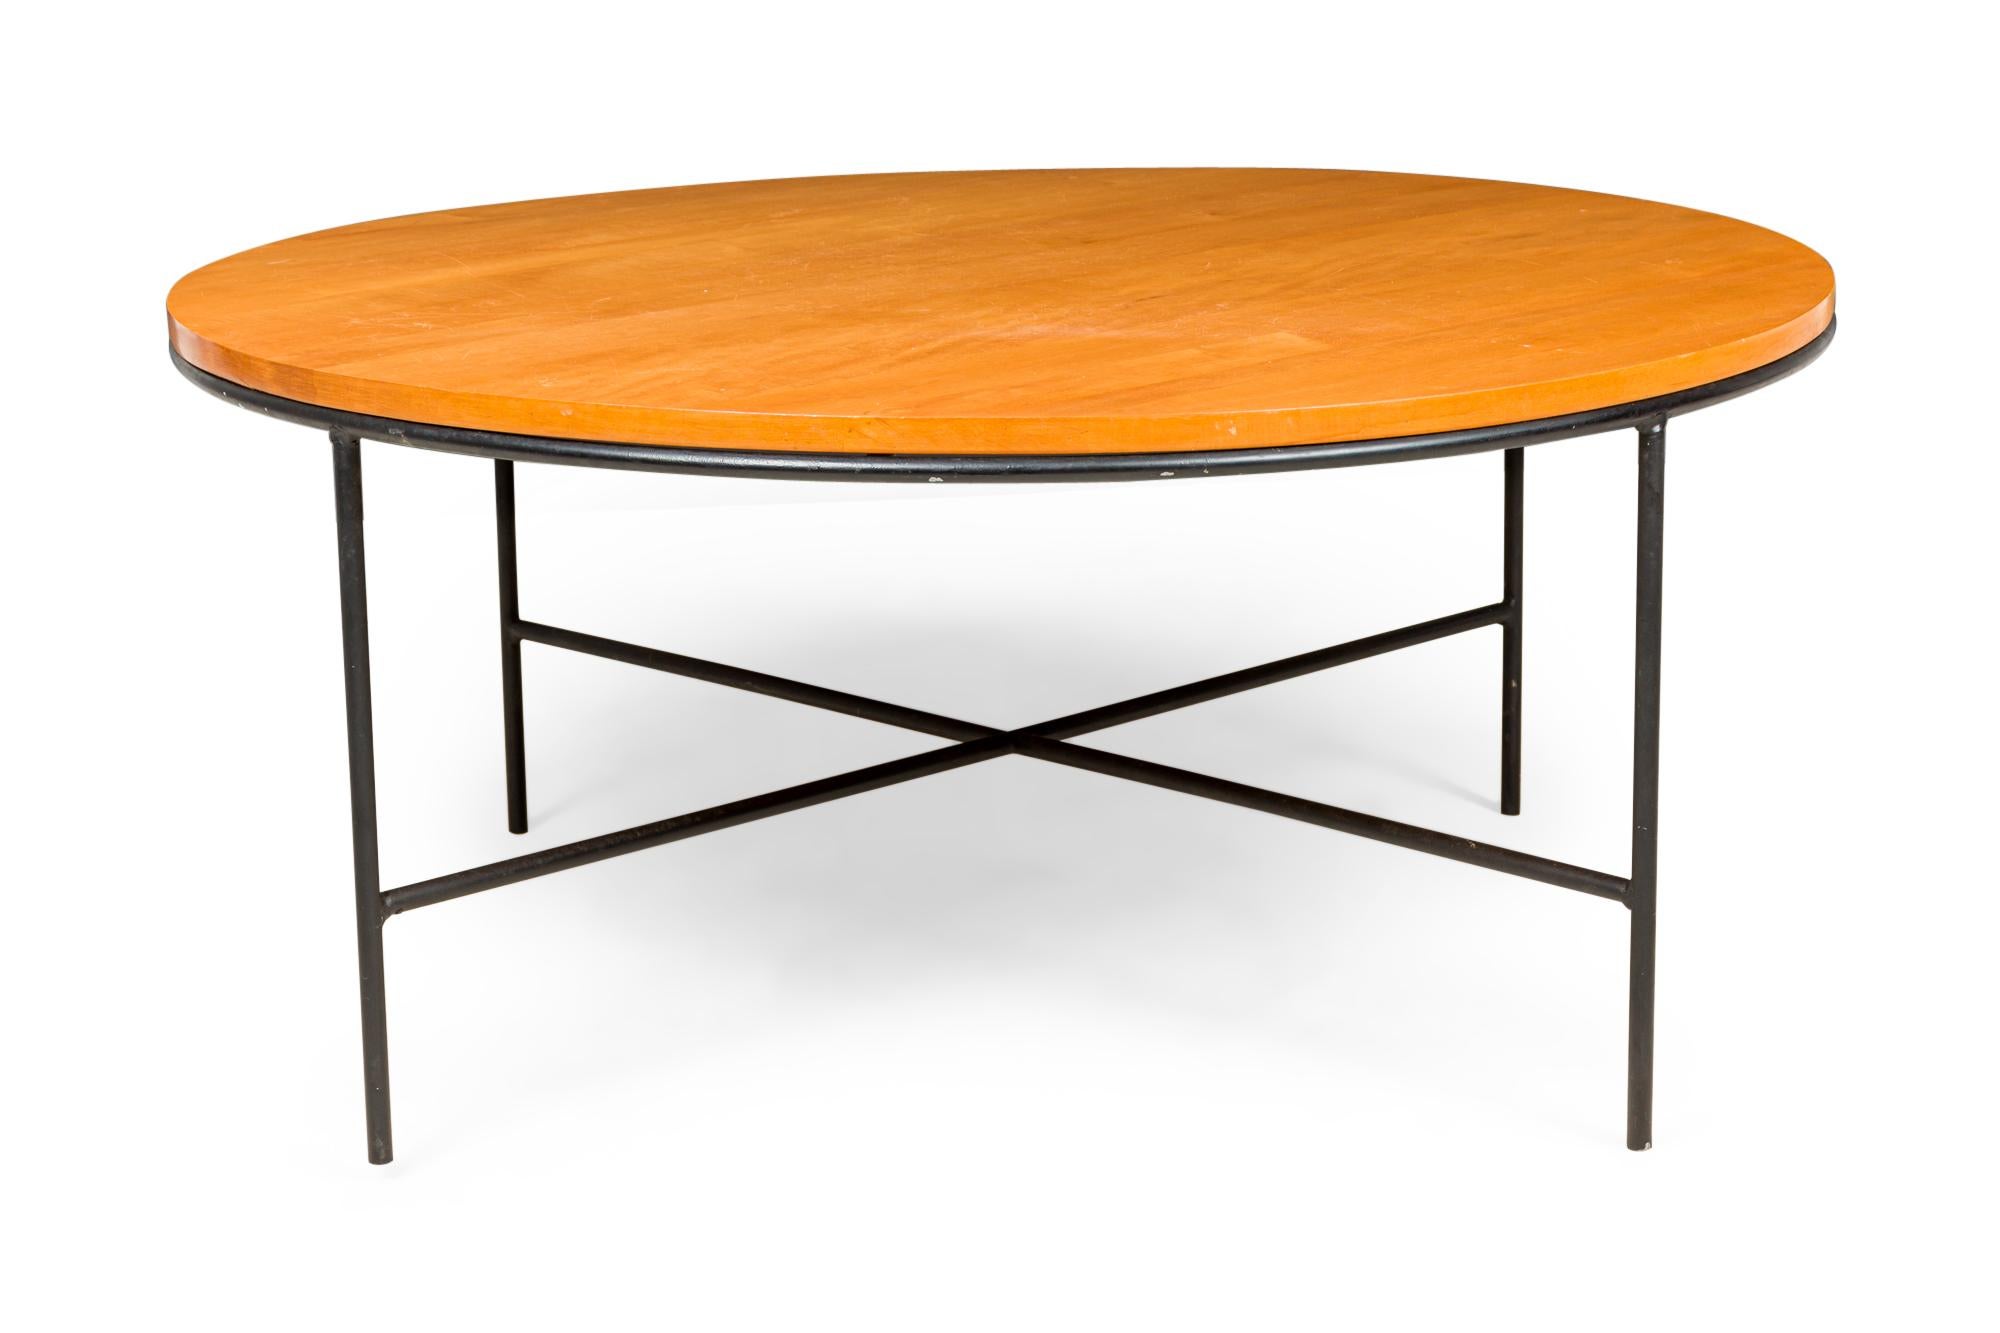 American Paul McCobb for Winchendon Planner Group Circular Maple and Iron Coffee Tables For Sale